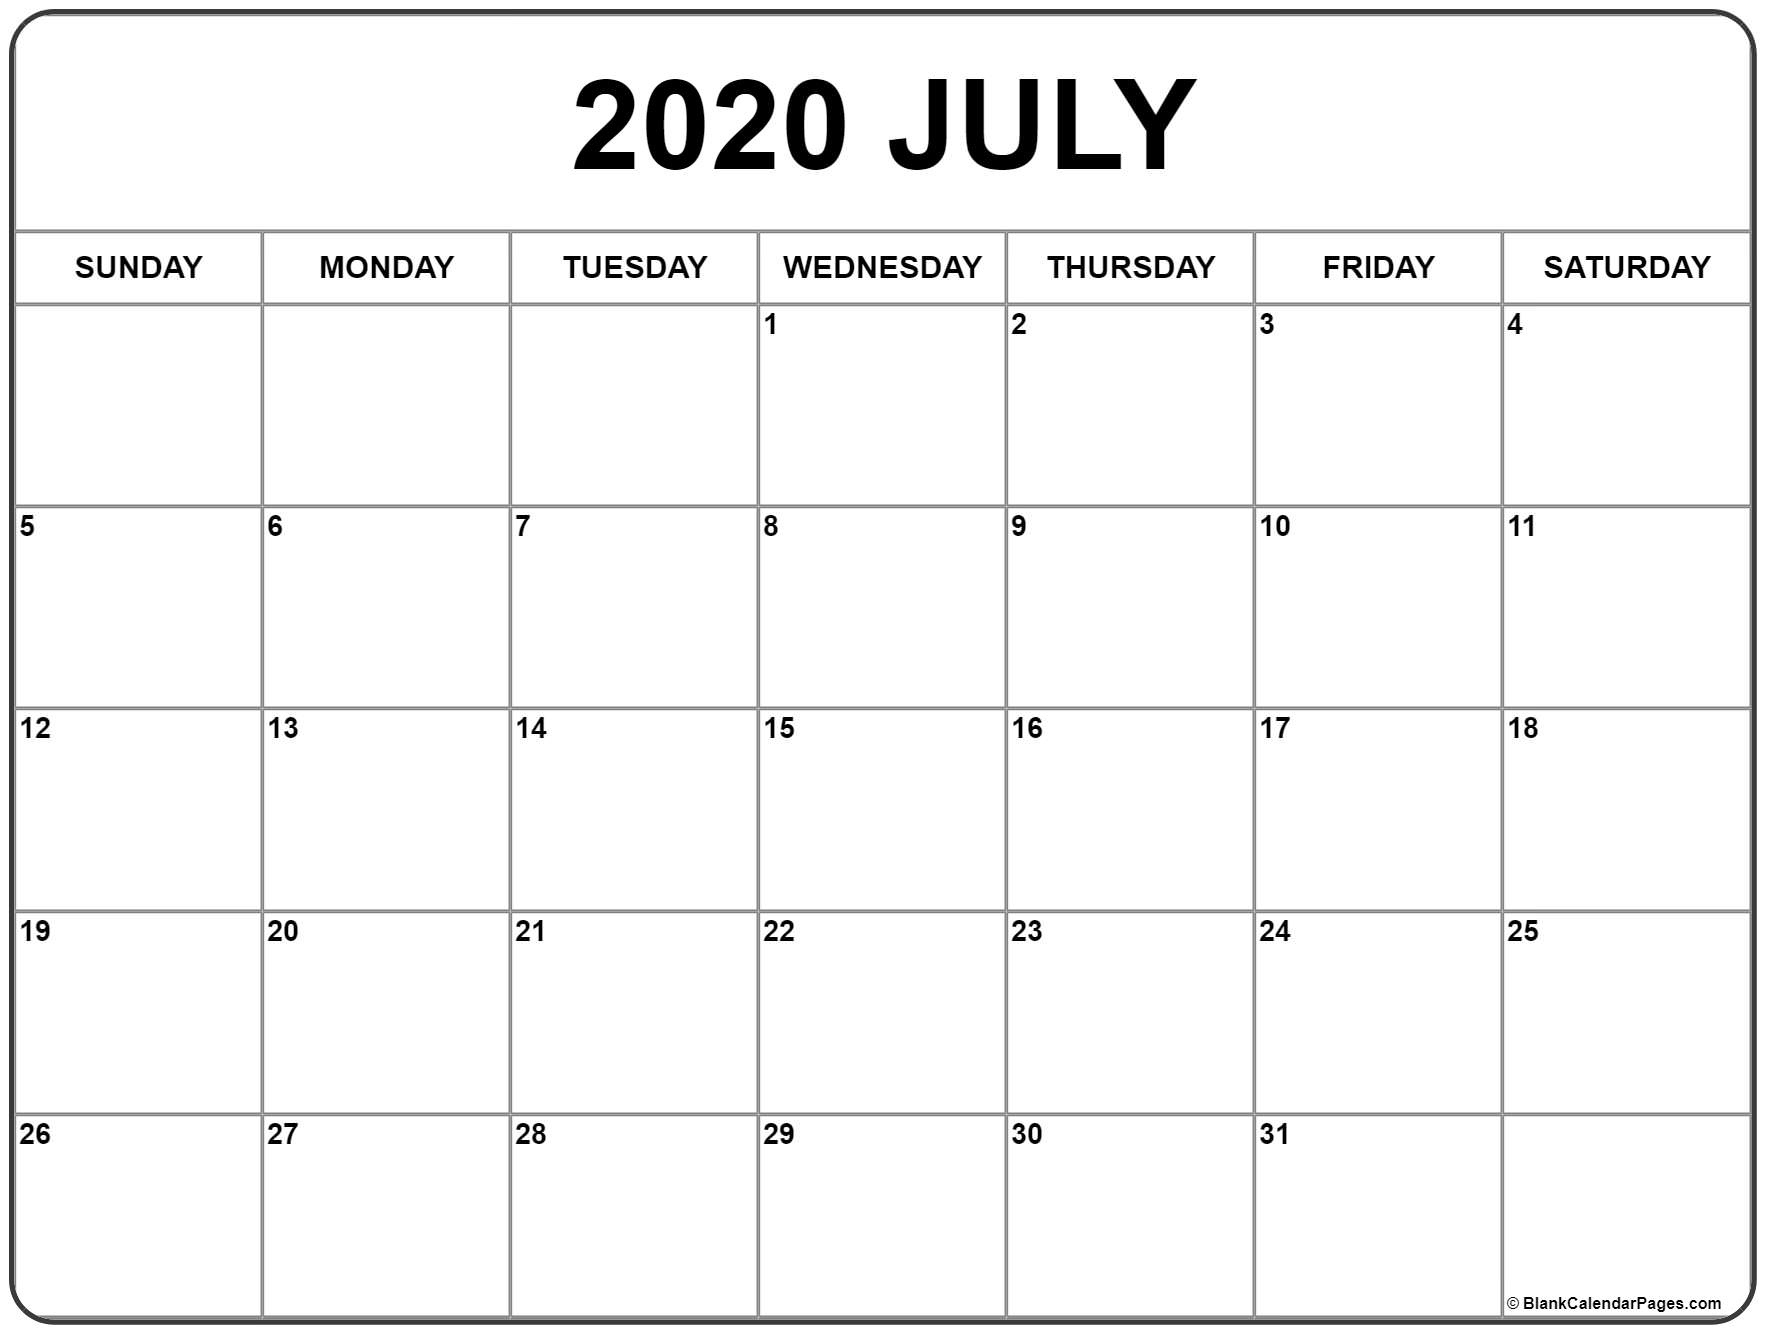 2020 Calendar Printable With Numbered Days | Monthly Dashing 2020 Calender With Numbered Days